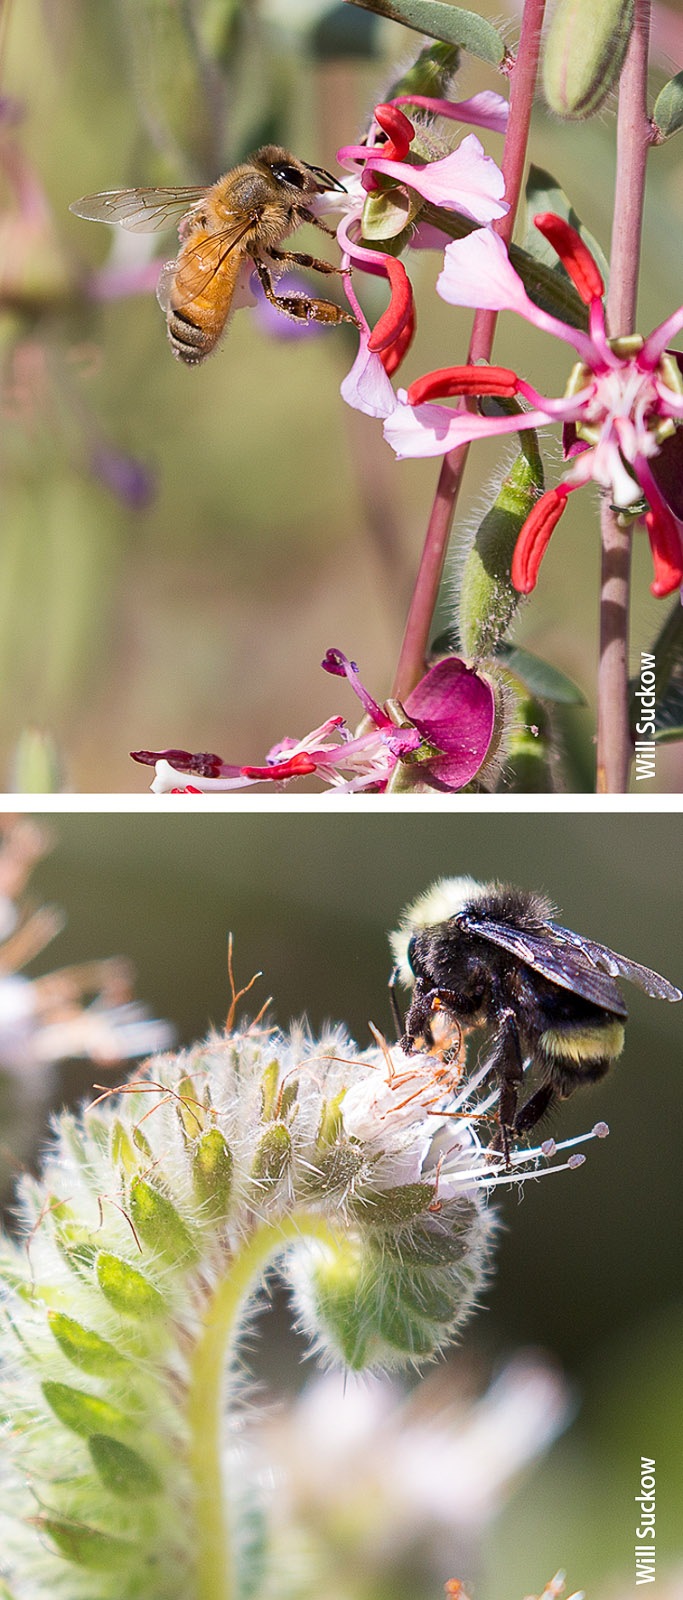 Above, bees visit wildflowers in a hedgerow: a honey bee on elegant clarkia (Clarkia unguiculata) and a bumble bee on California phacelia (Phacelia californica).